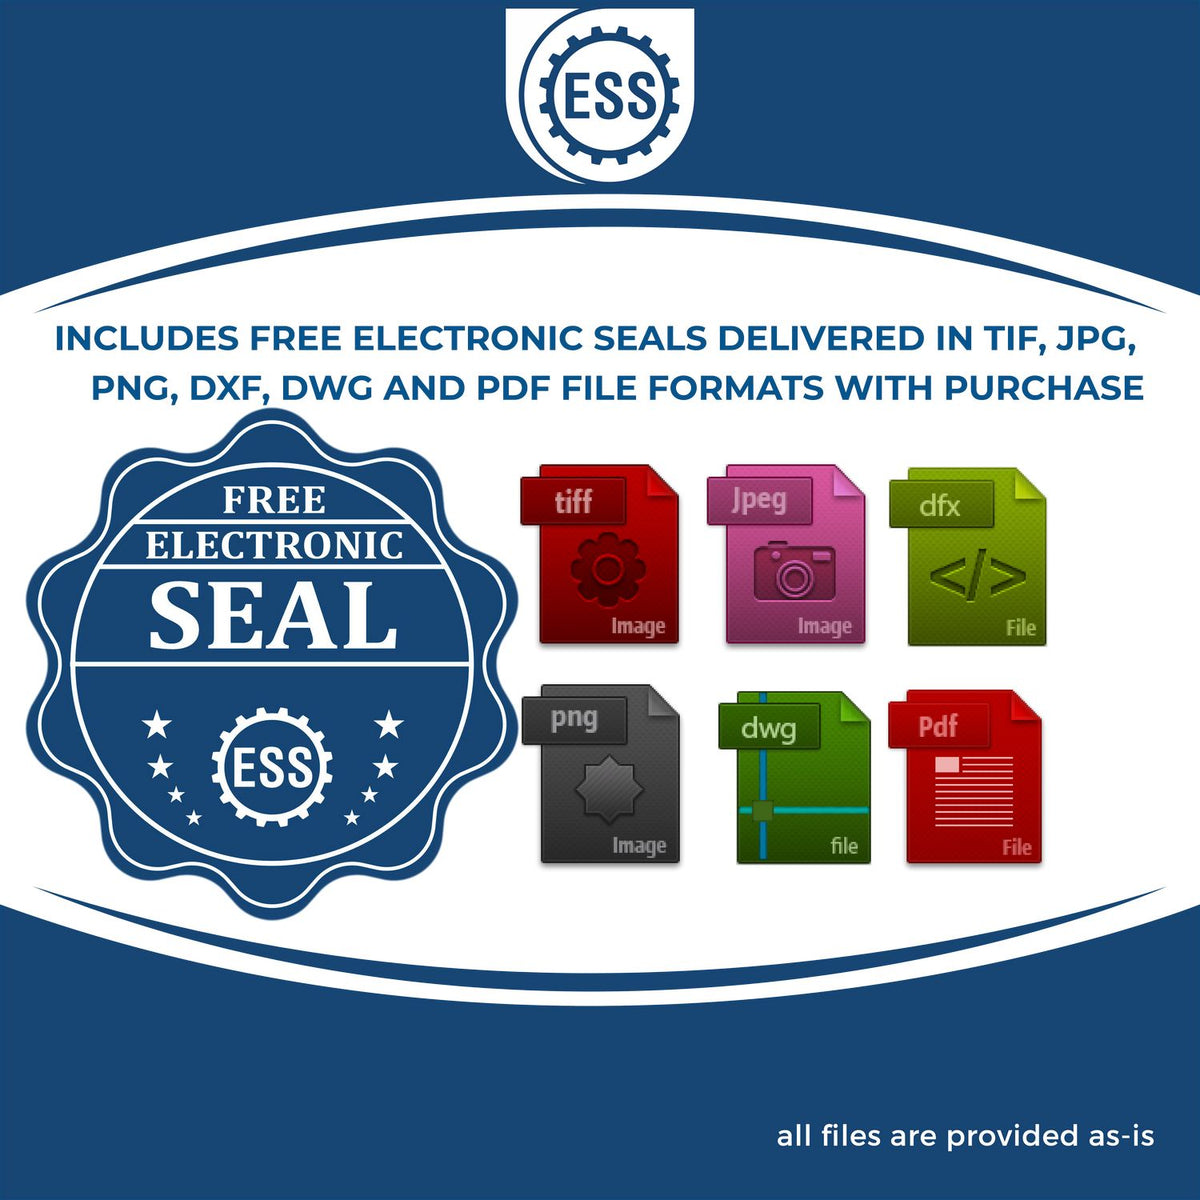 An infographic for the free electronic seal for the Long Reach New York Geology Seal illustrating the different file type icons such as DXF, DWG, TIF, JPG and PNG.